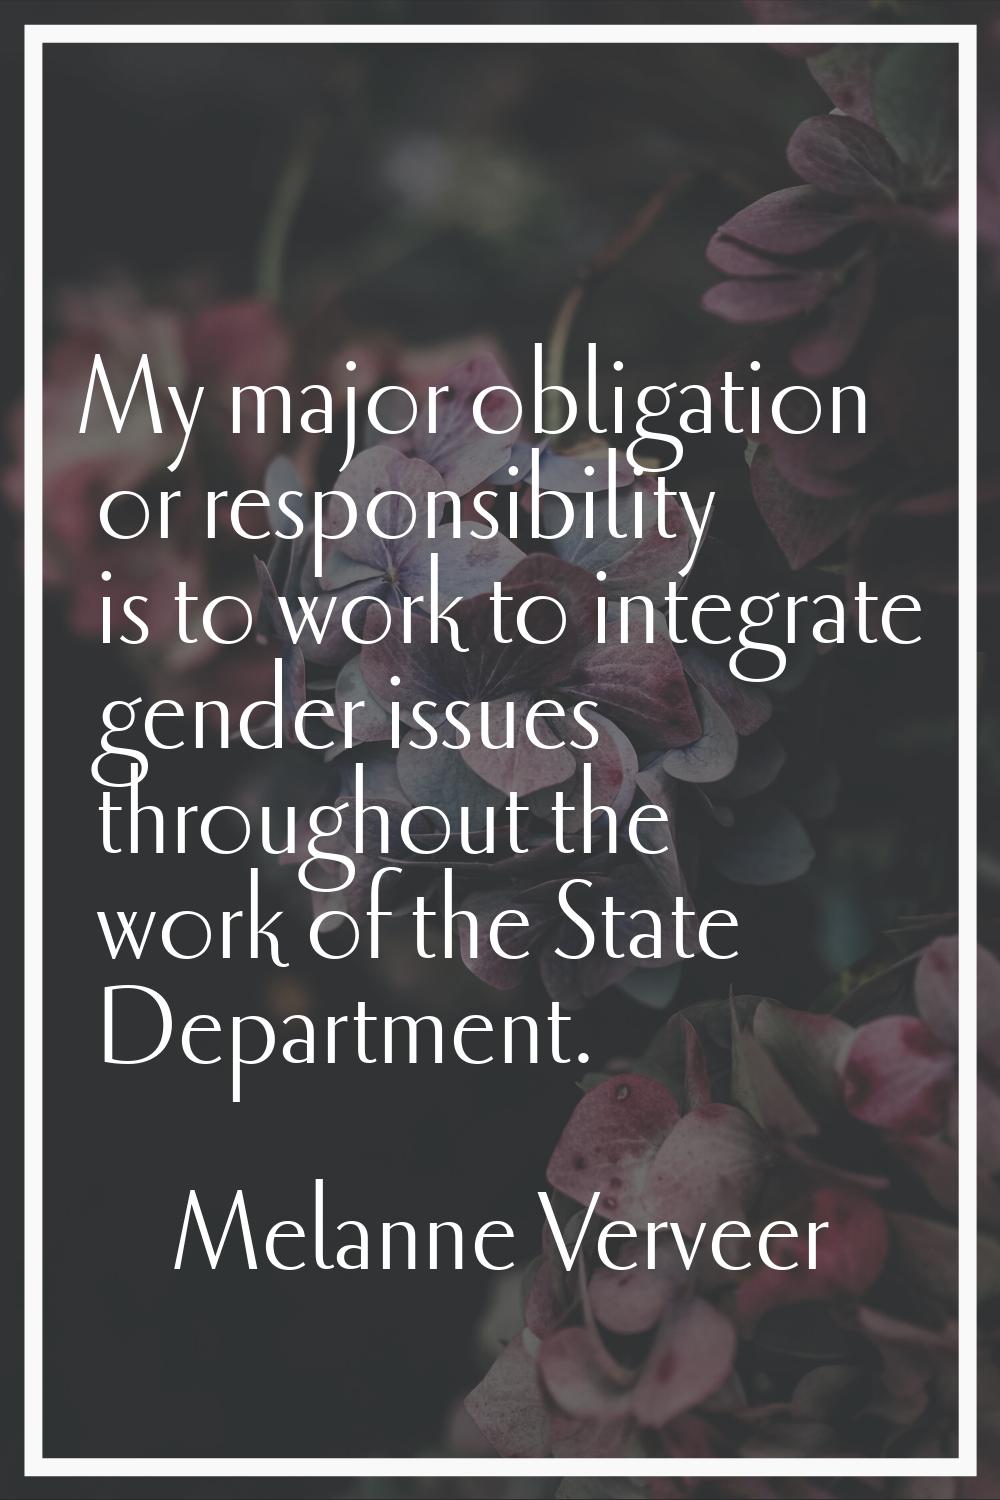 My major obligation or responsibility is to work to integrate gender issues throughout the work of 